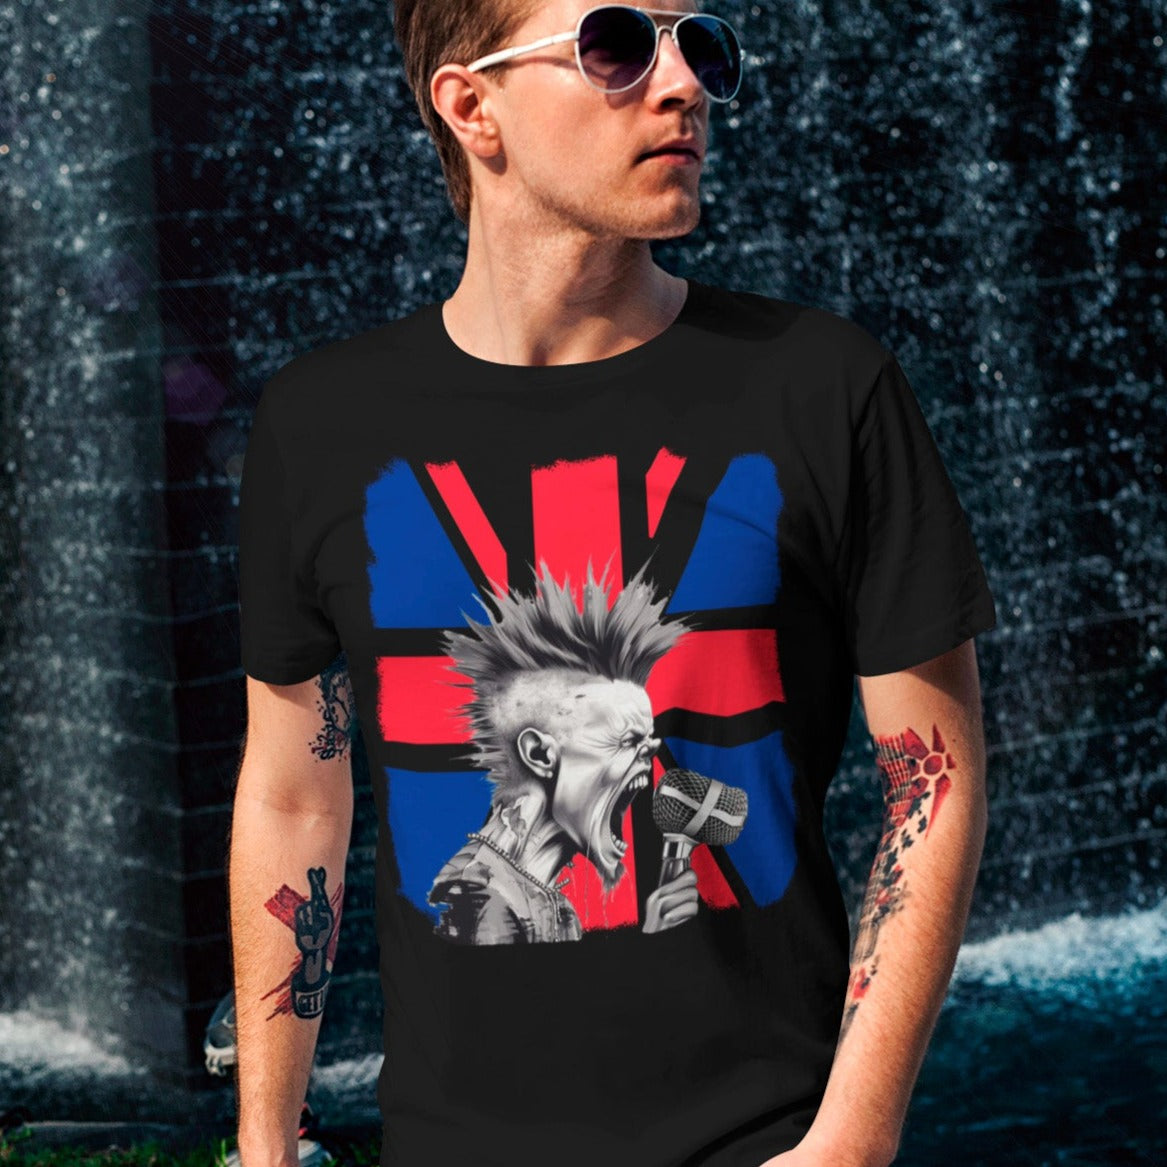 long-live-punk-black-t-shirt-british-flag-with-punker-singing-mockup-of-a-cool-man-walking-by-a-fountain